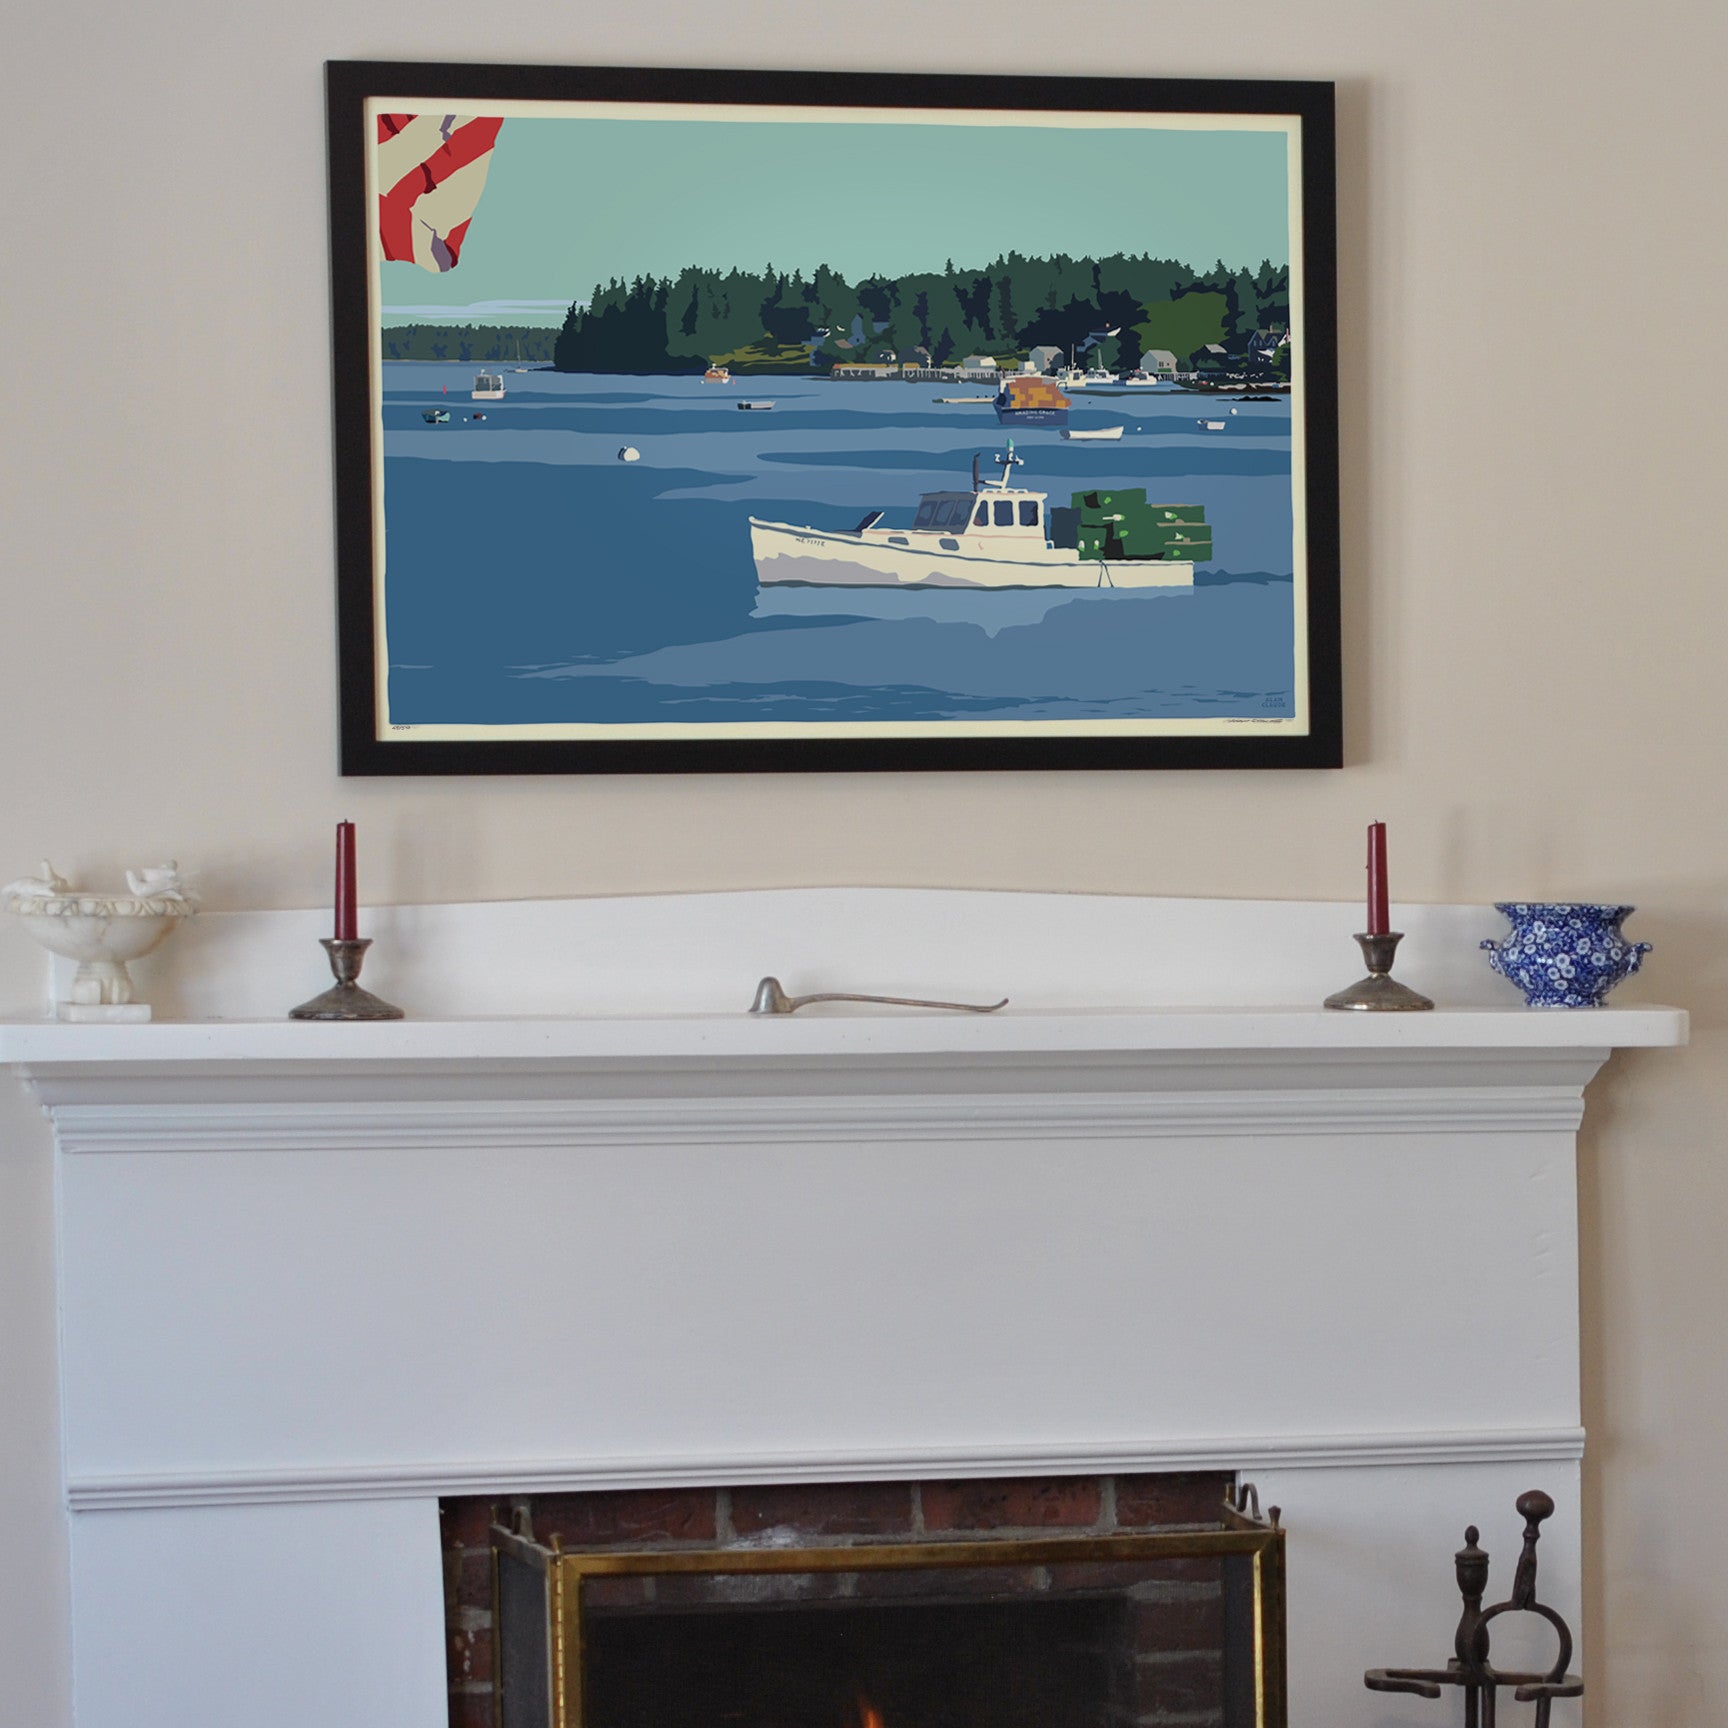 Port Clyde Lobster Boat Art Print 24" x 36" Framed Wall Poster By Alan Claude  - Maine